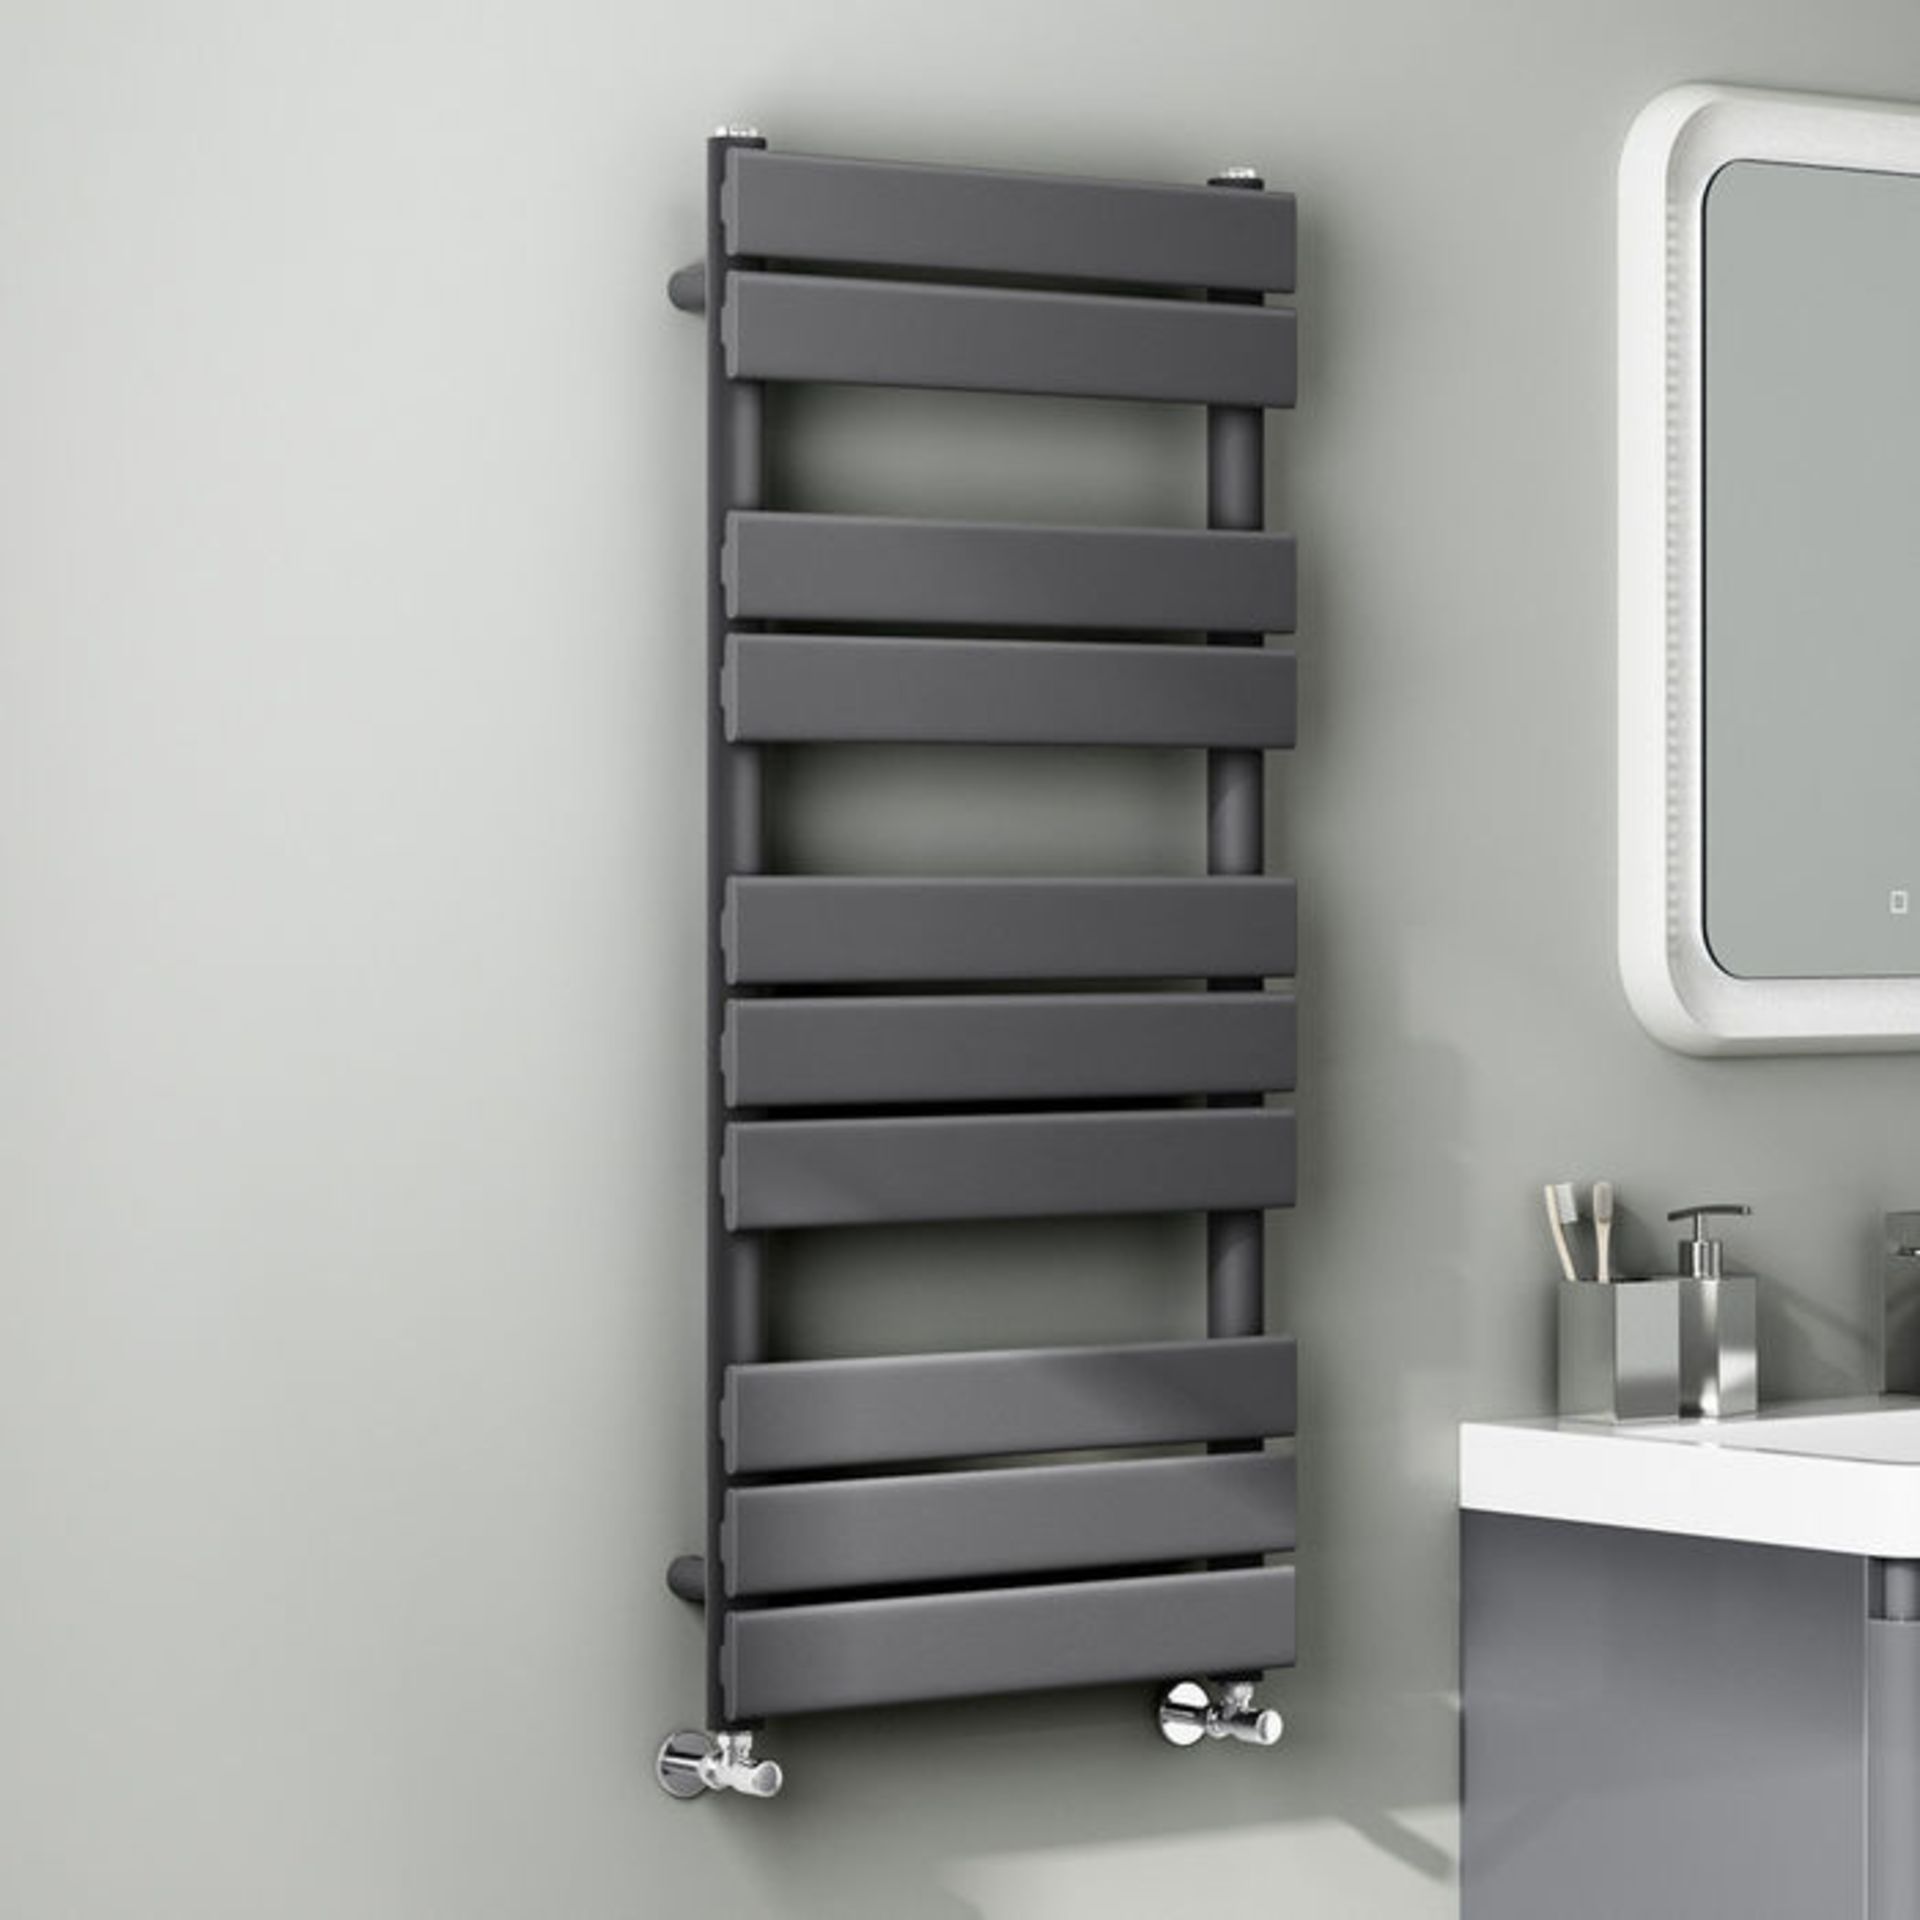 (ZZ121) 1000x450mm - 25mm Tubes - Anthracite Heated Straight Rail Ladder Towel Radiator. This